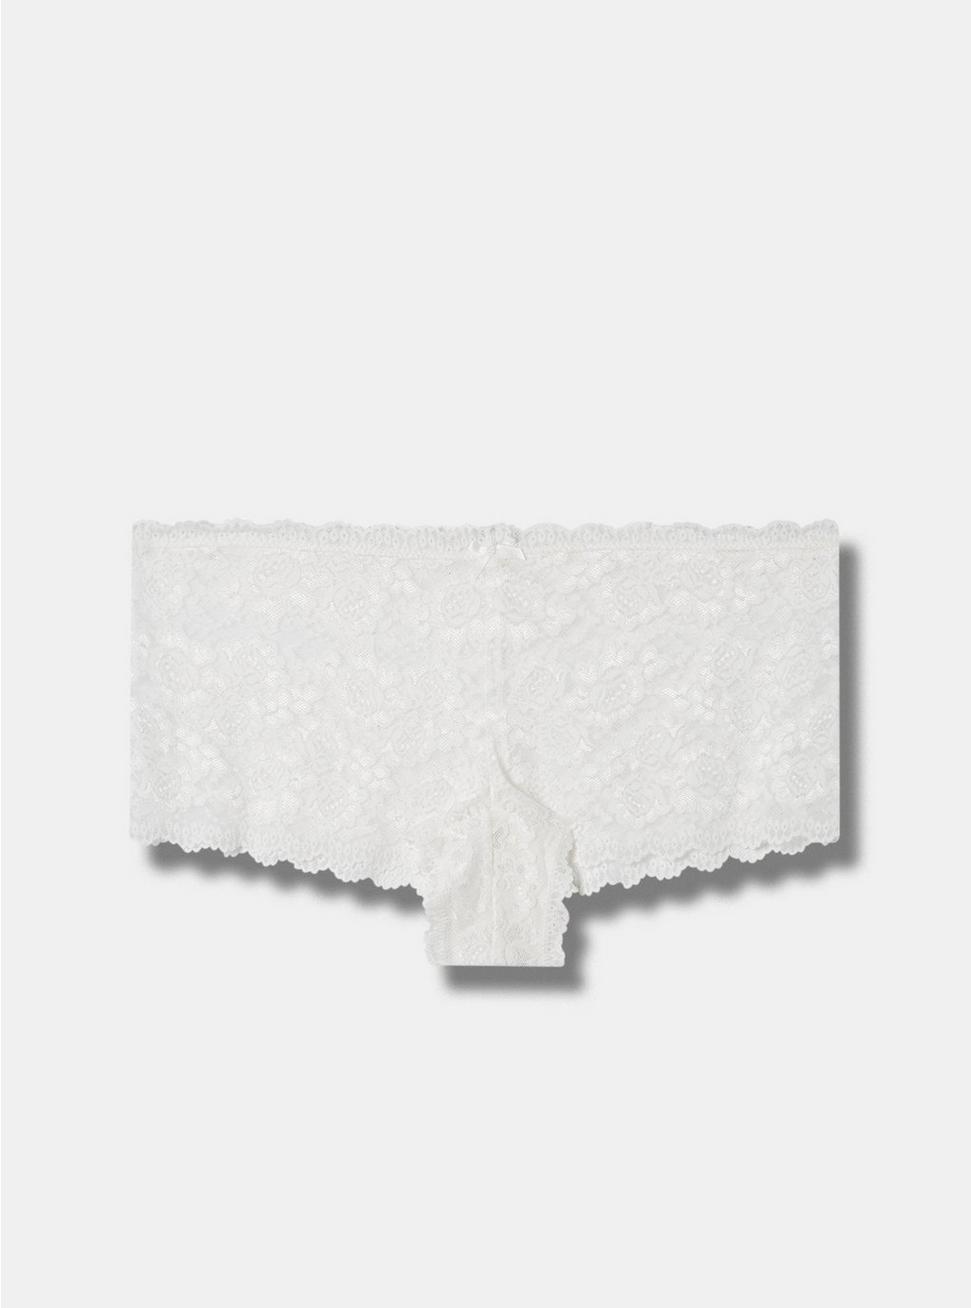 Simply Lace Mid-Rise Cheeky Panty, CLOUD DANCER, hi-res